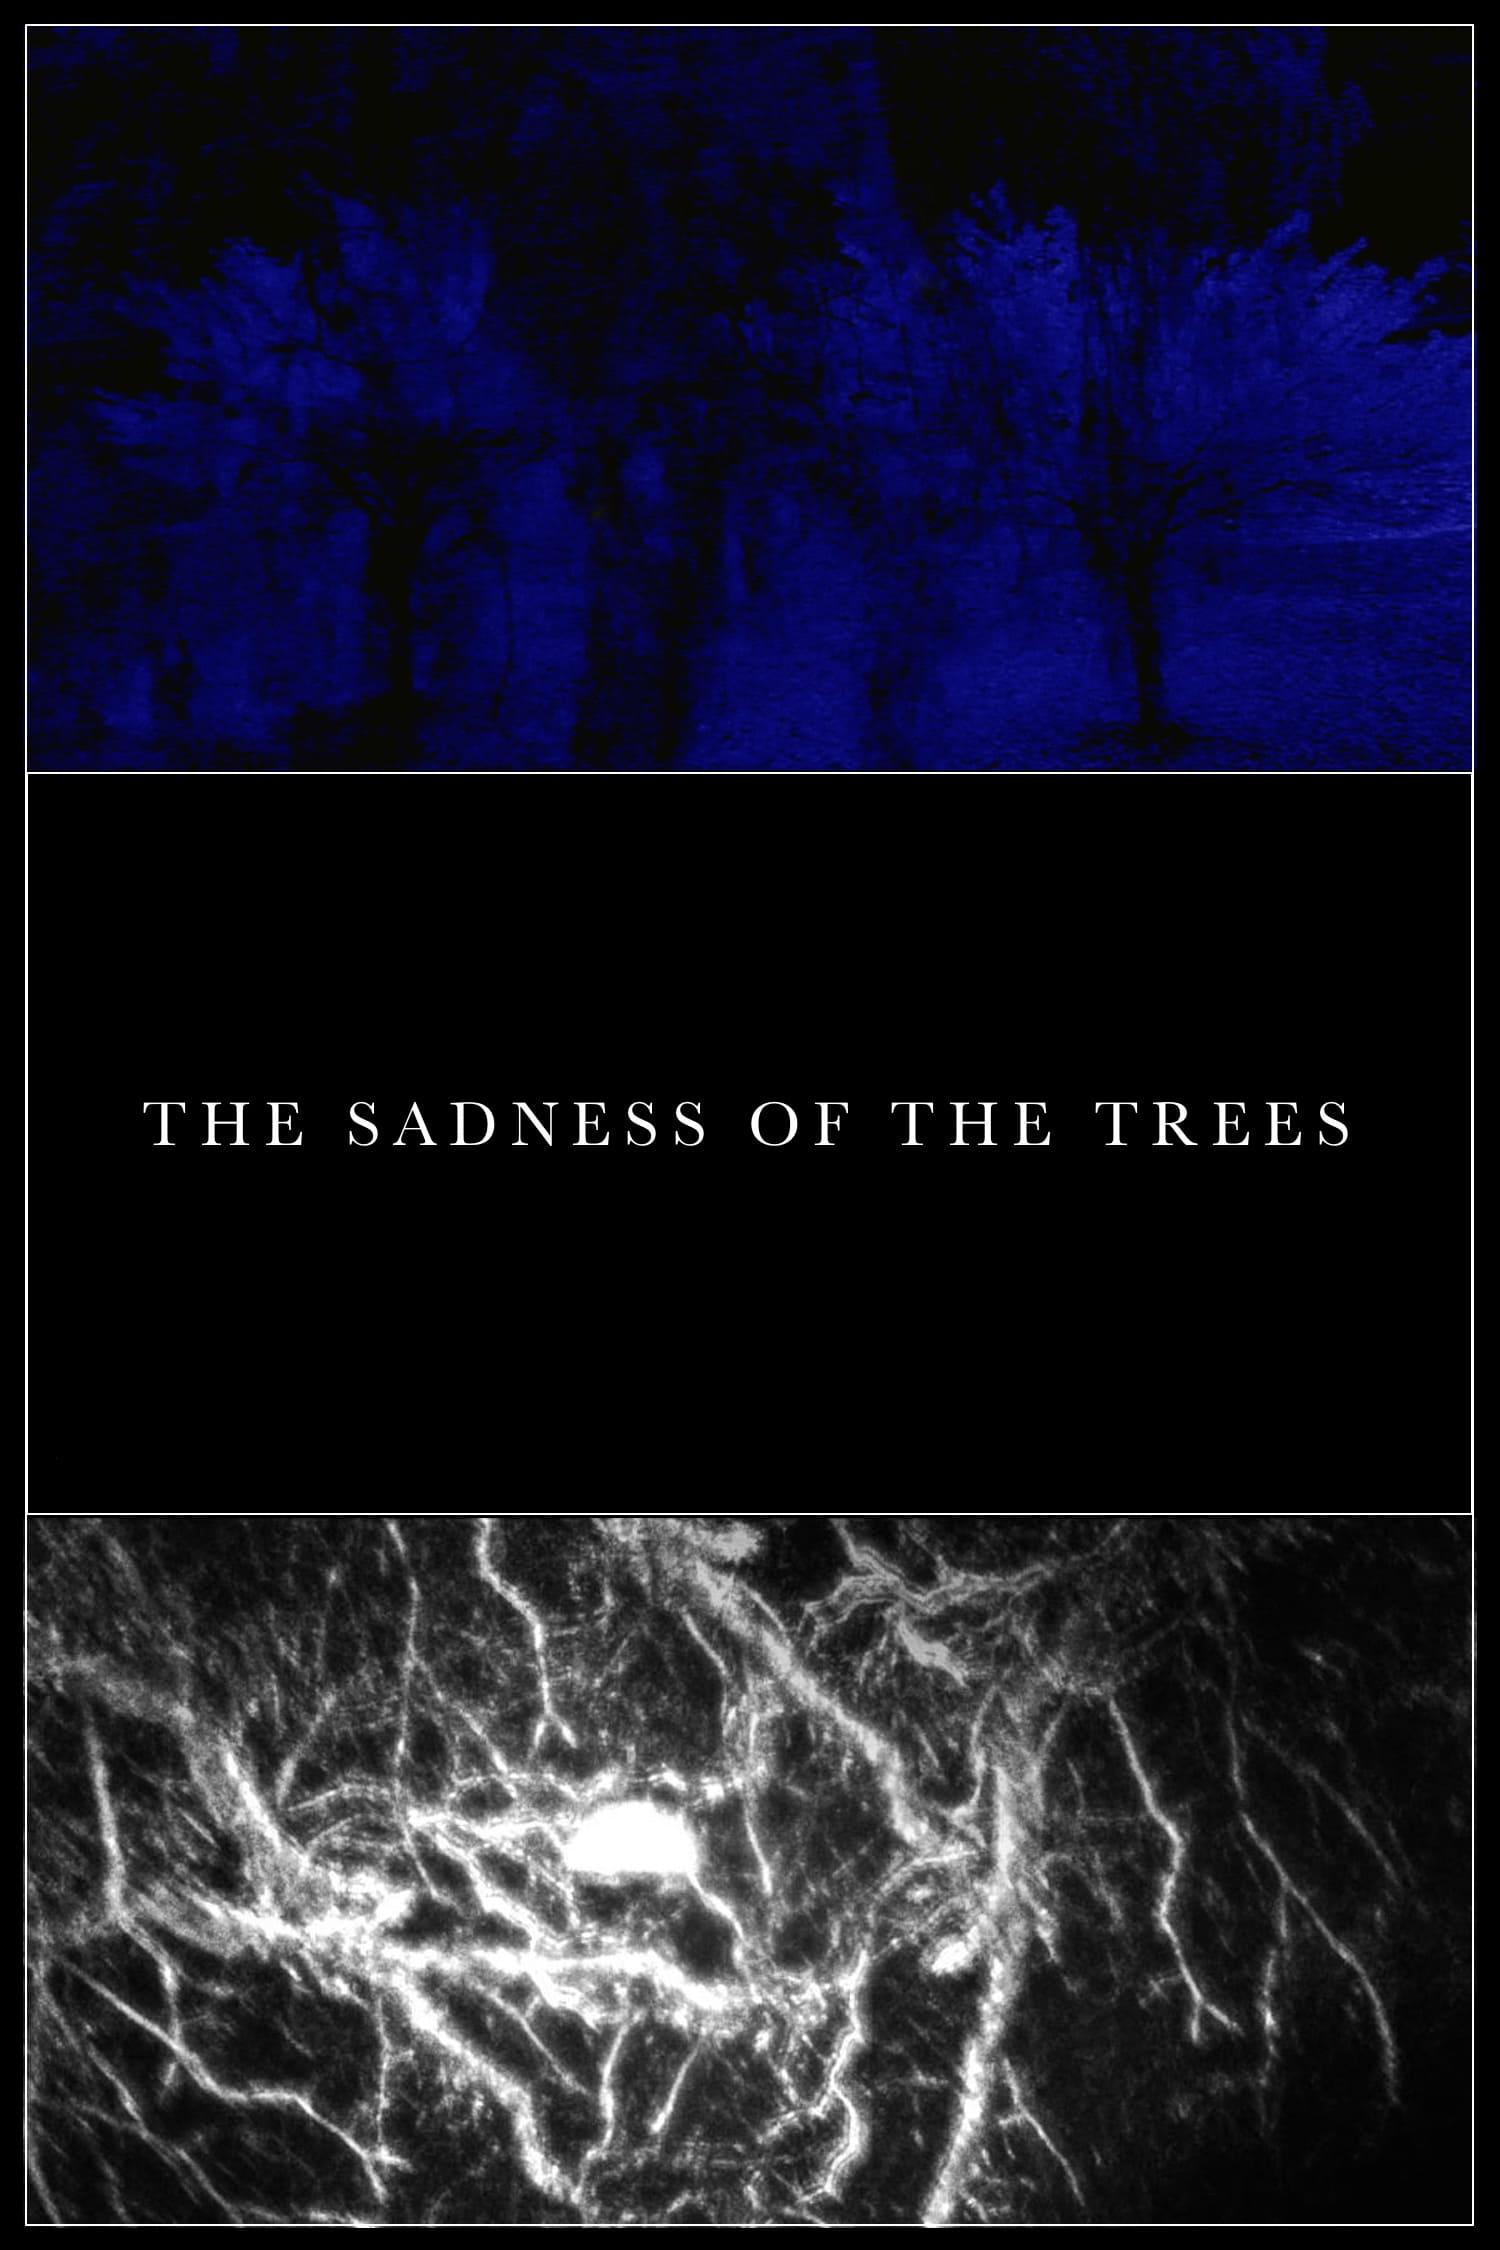 The Sadness of the Trees poster